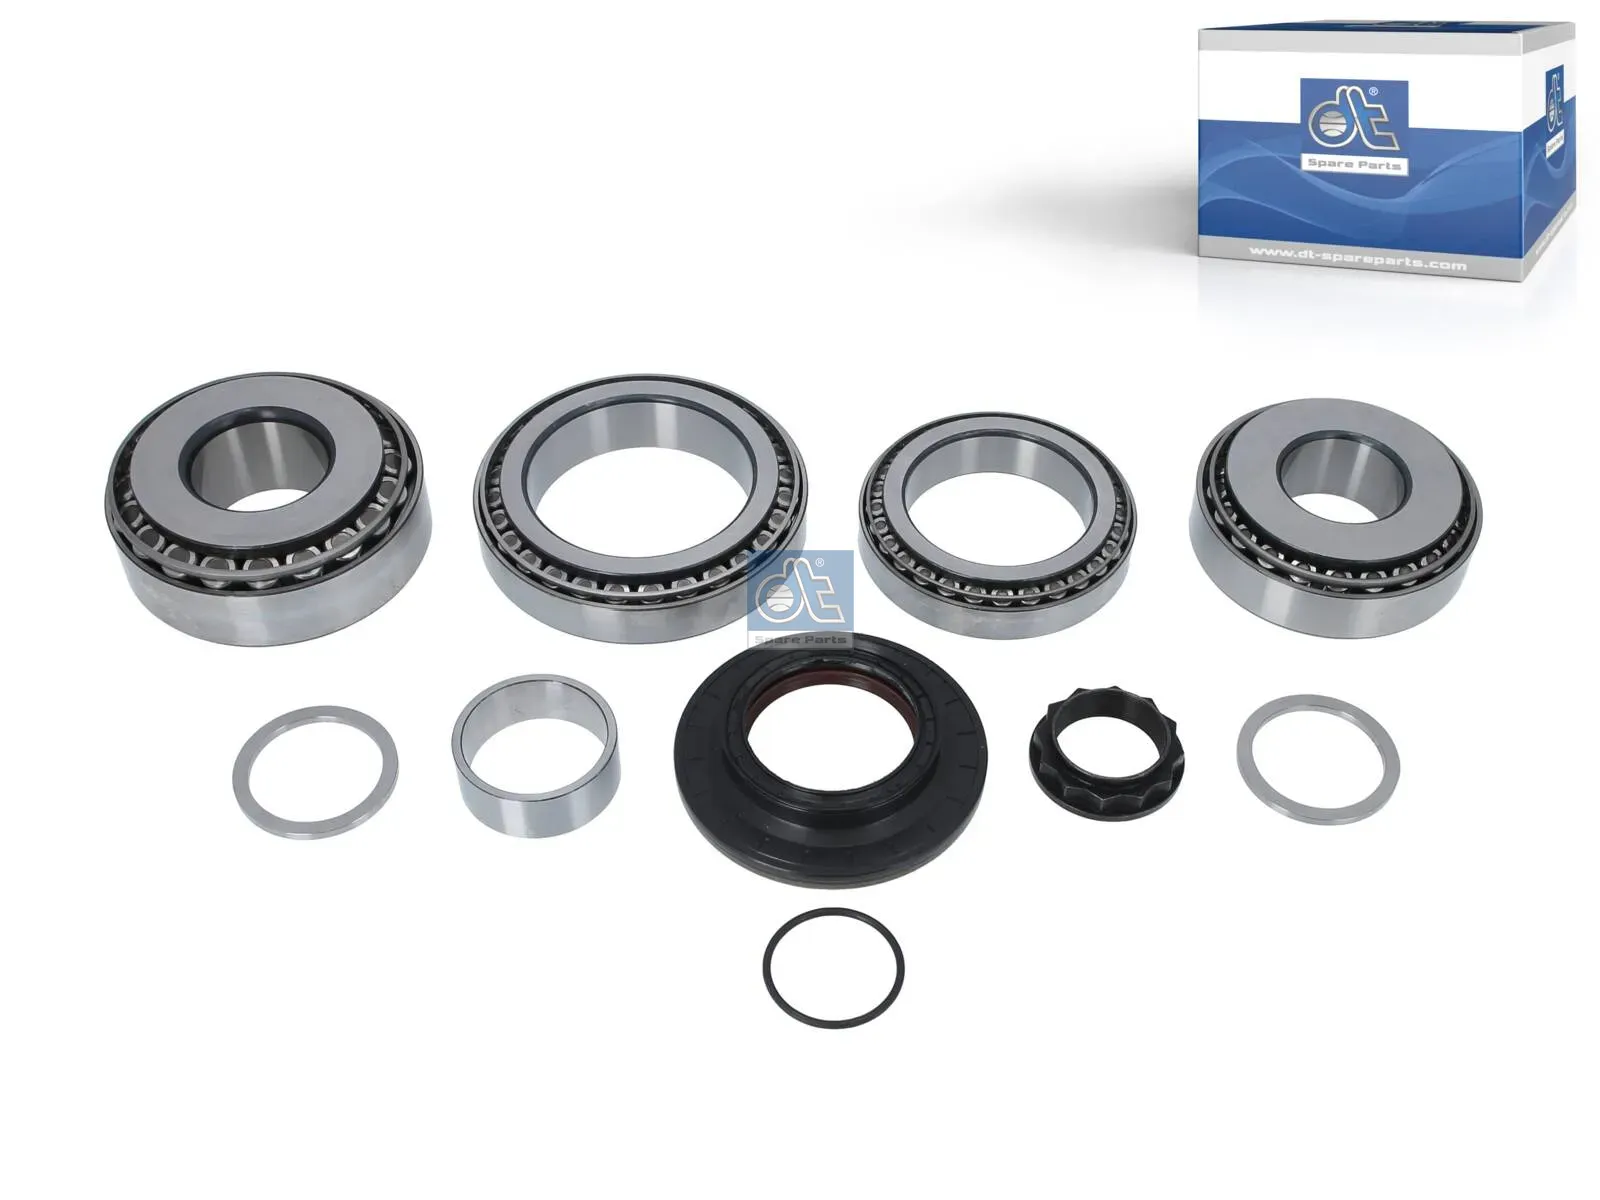 Bearing kit, with seal ring, differential